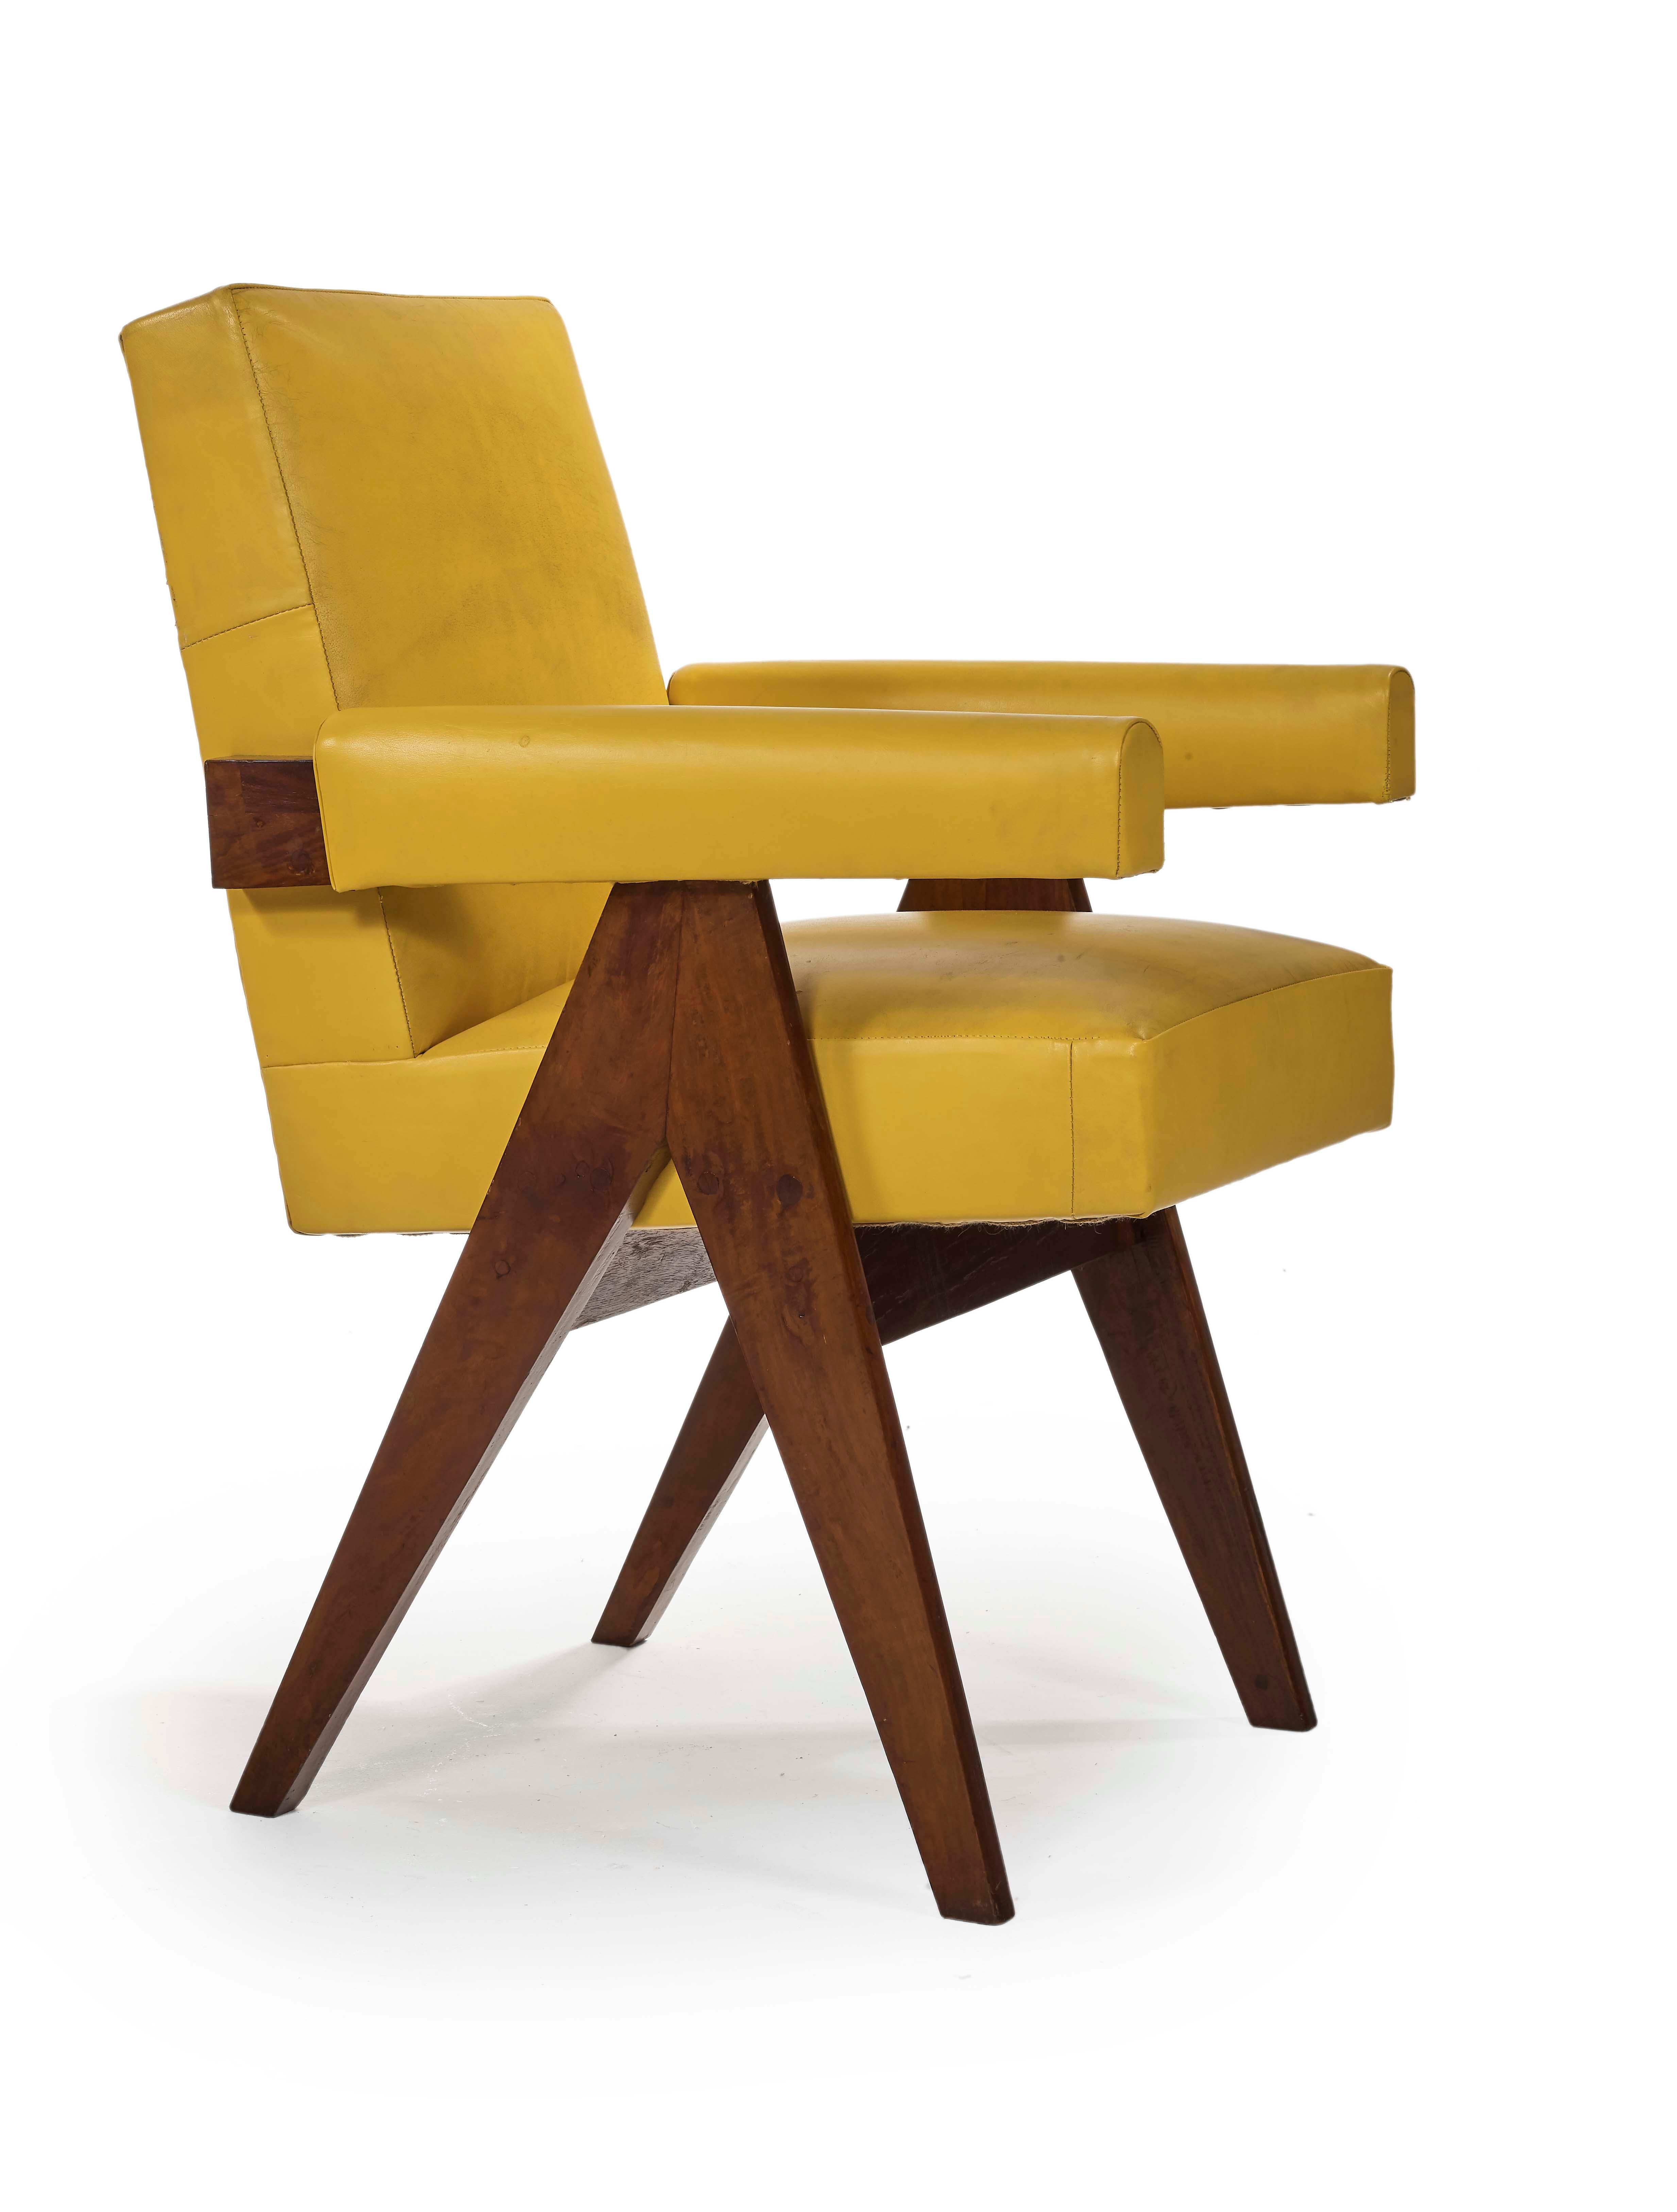 Indian Pierre Jeanneret, PJ-SI-30-C, Committee Armchair, Chandigarh, circa 1955